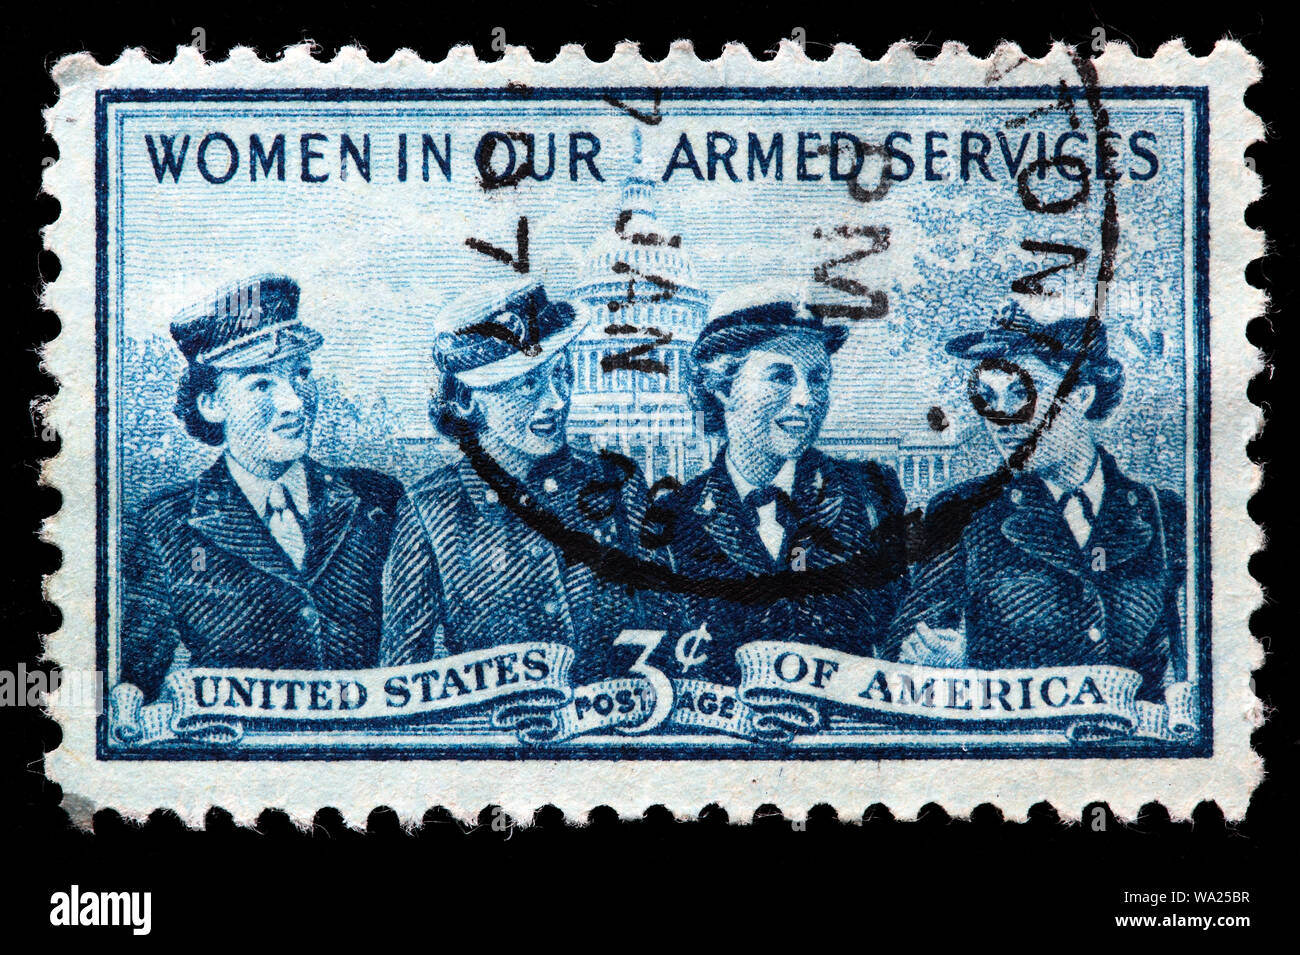 Women in armed forces, Marine Corps, Army, Navy, Air Force, postage stamp, USA, 1952 Stock Photo